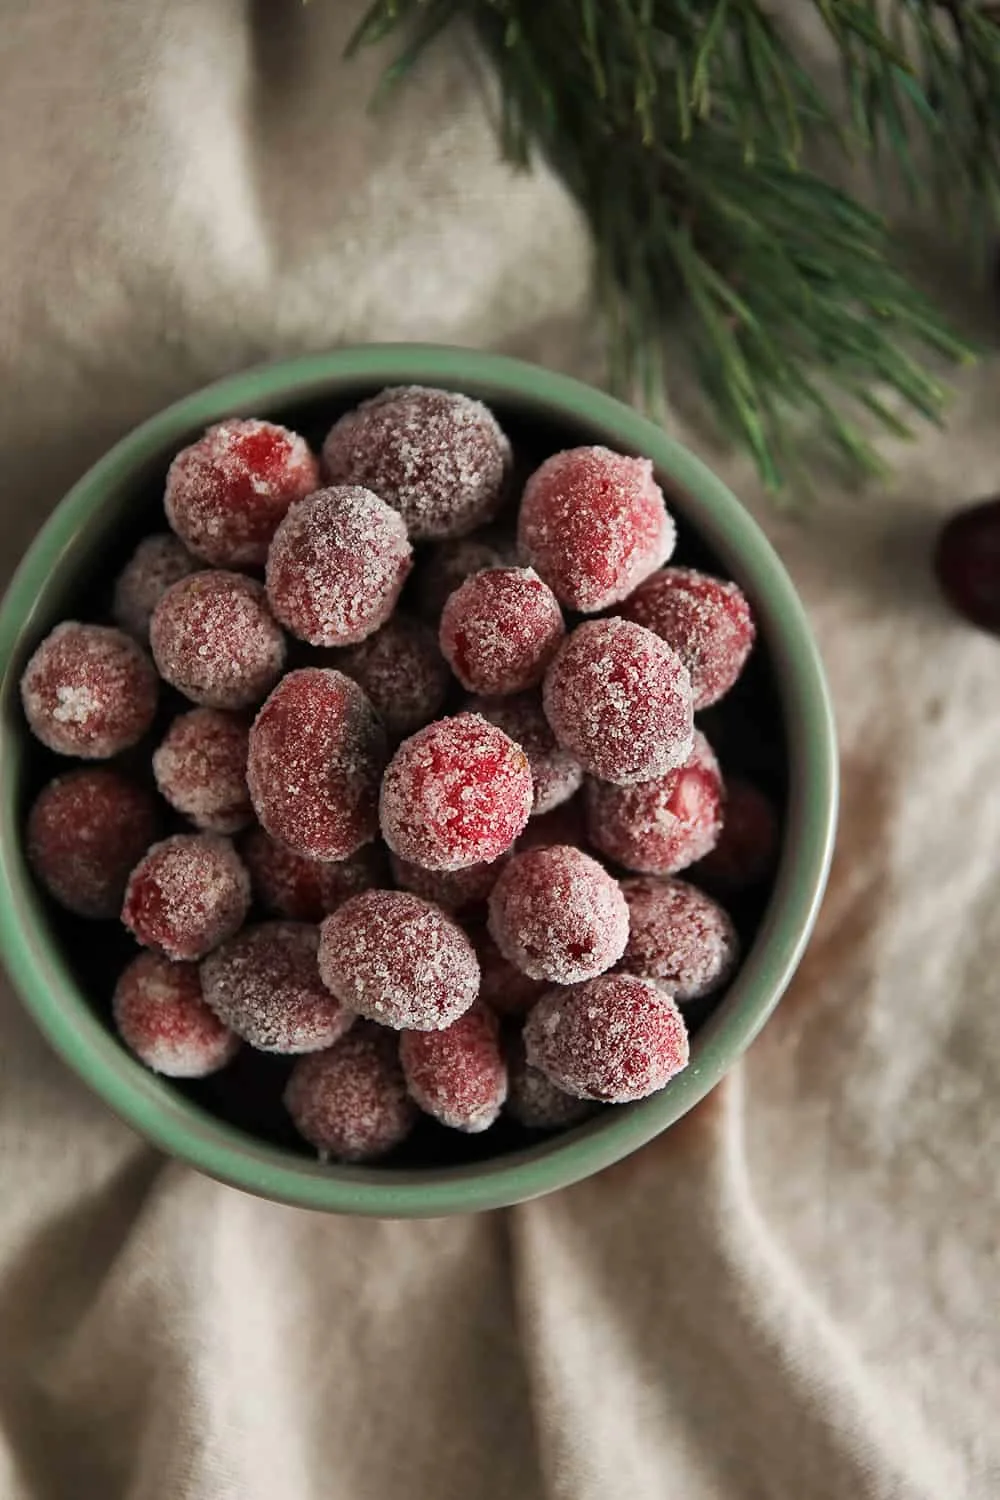 You will love knowing how to make Sugared Cranberries to add a festive touch to holiday treats